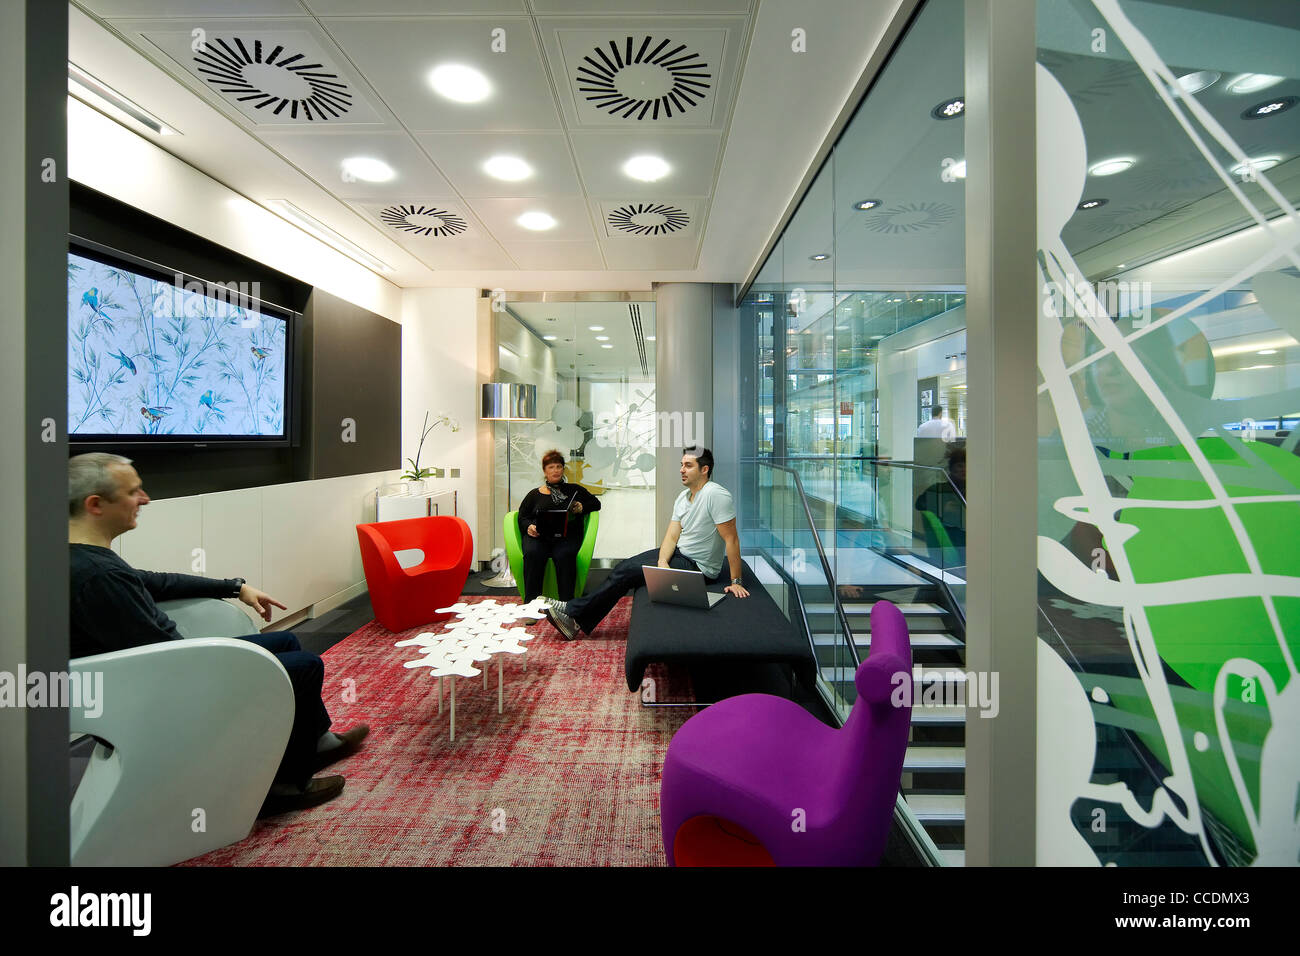 HOK OFFICES HOK ARCHITECTS THE QUBE BUILDING 90 WHITFIELD STREET LONDON UK 2009 INTERIOR SHOT SHOWING PEOPLE TALKING IN A Stock Photo